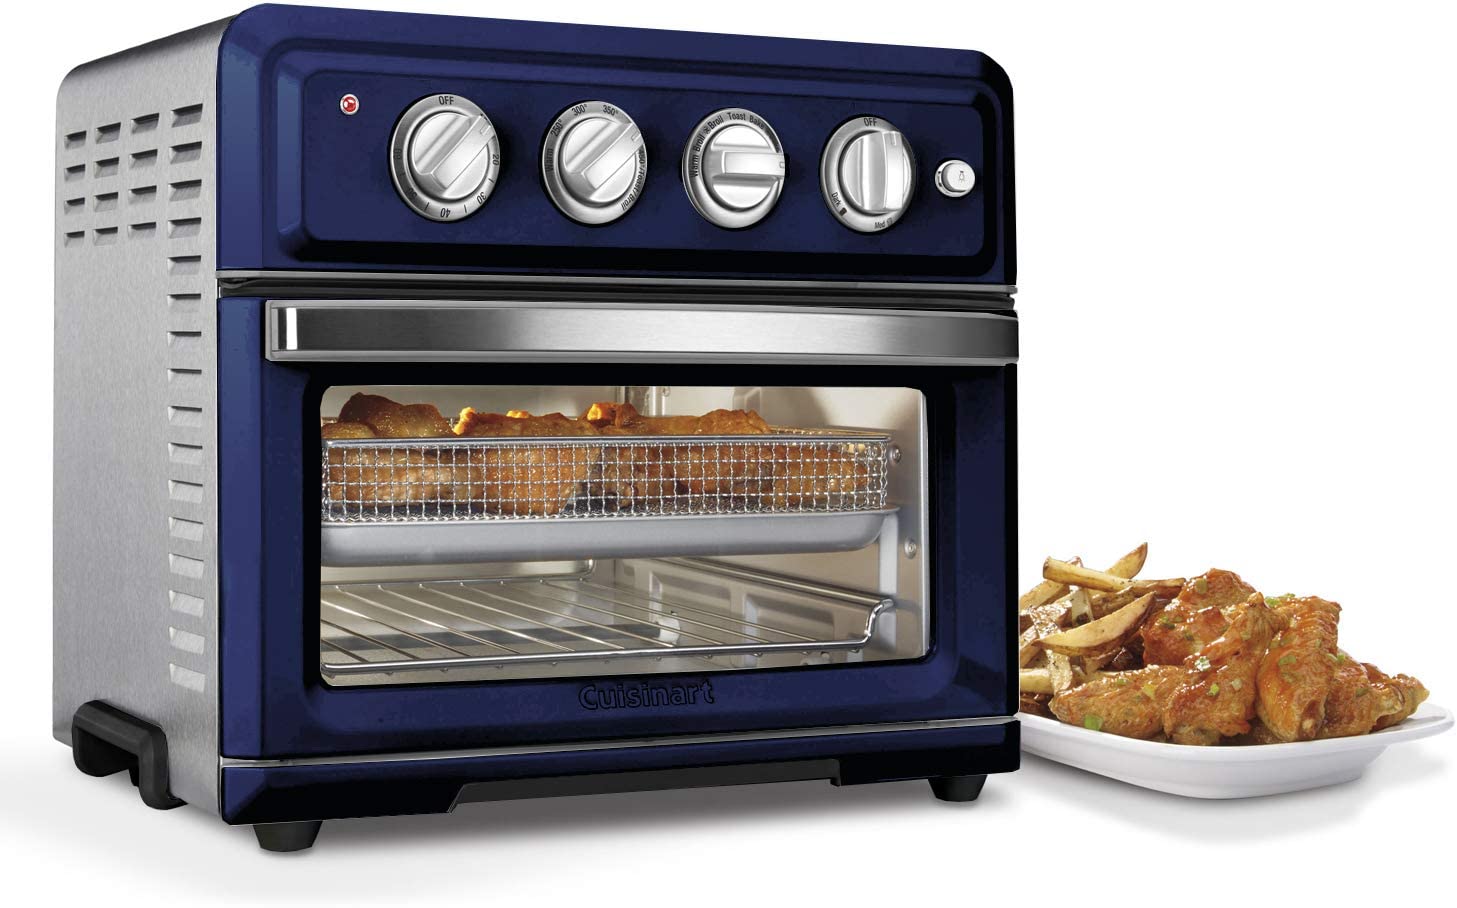 Cuisinart TOA-60NVFR Air Fryer Toaster Oven Navy - Certified Refurbished